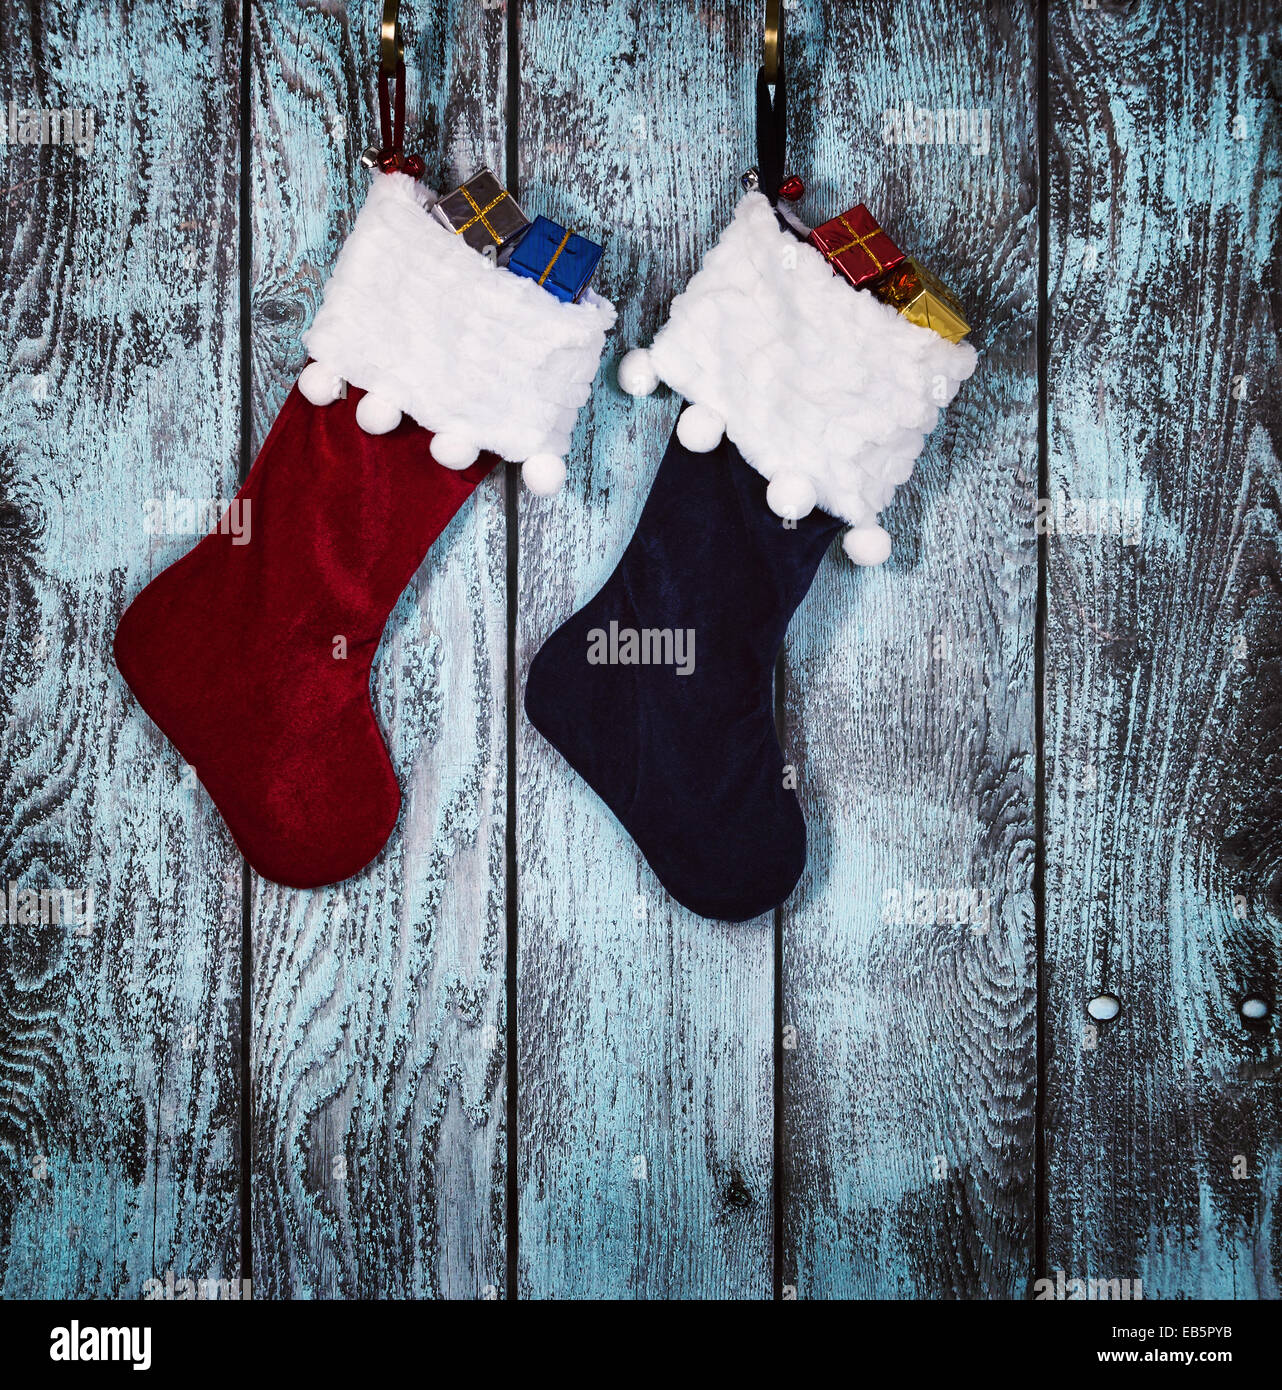 Christmas stocking hanging against rustic wood background Stock Photo